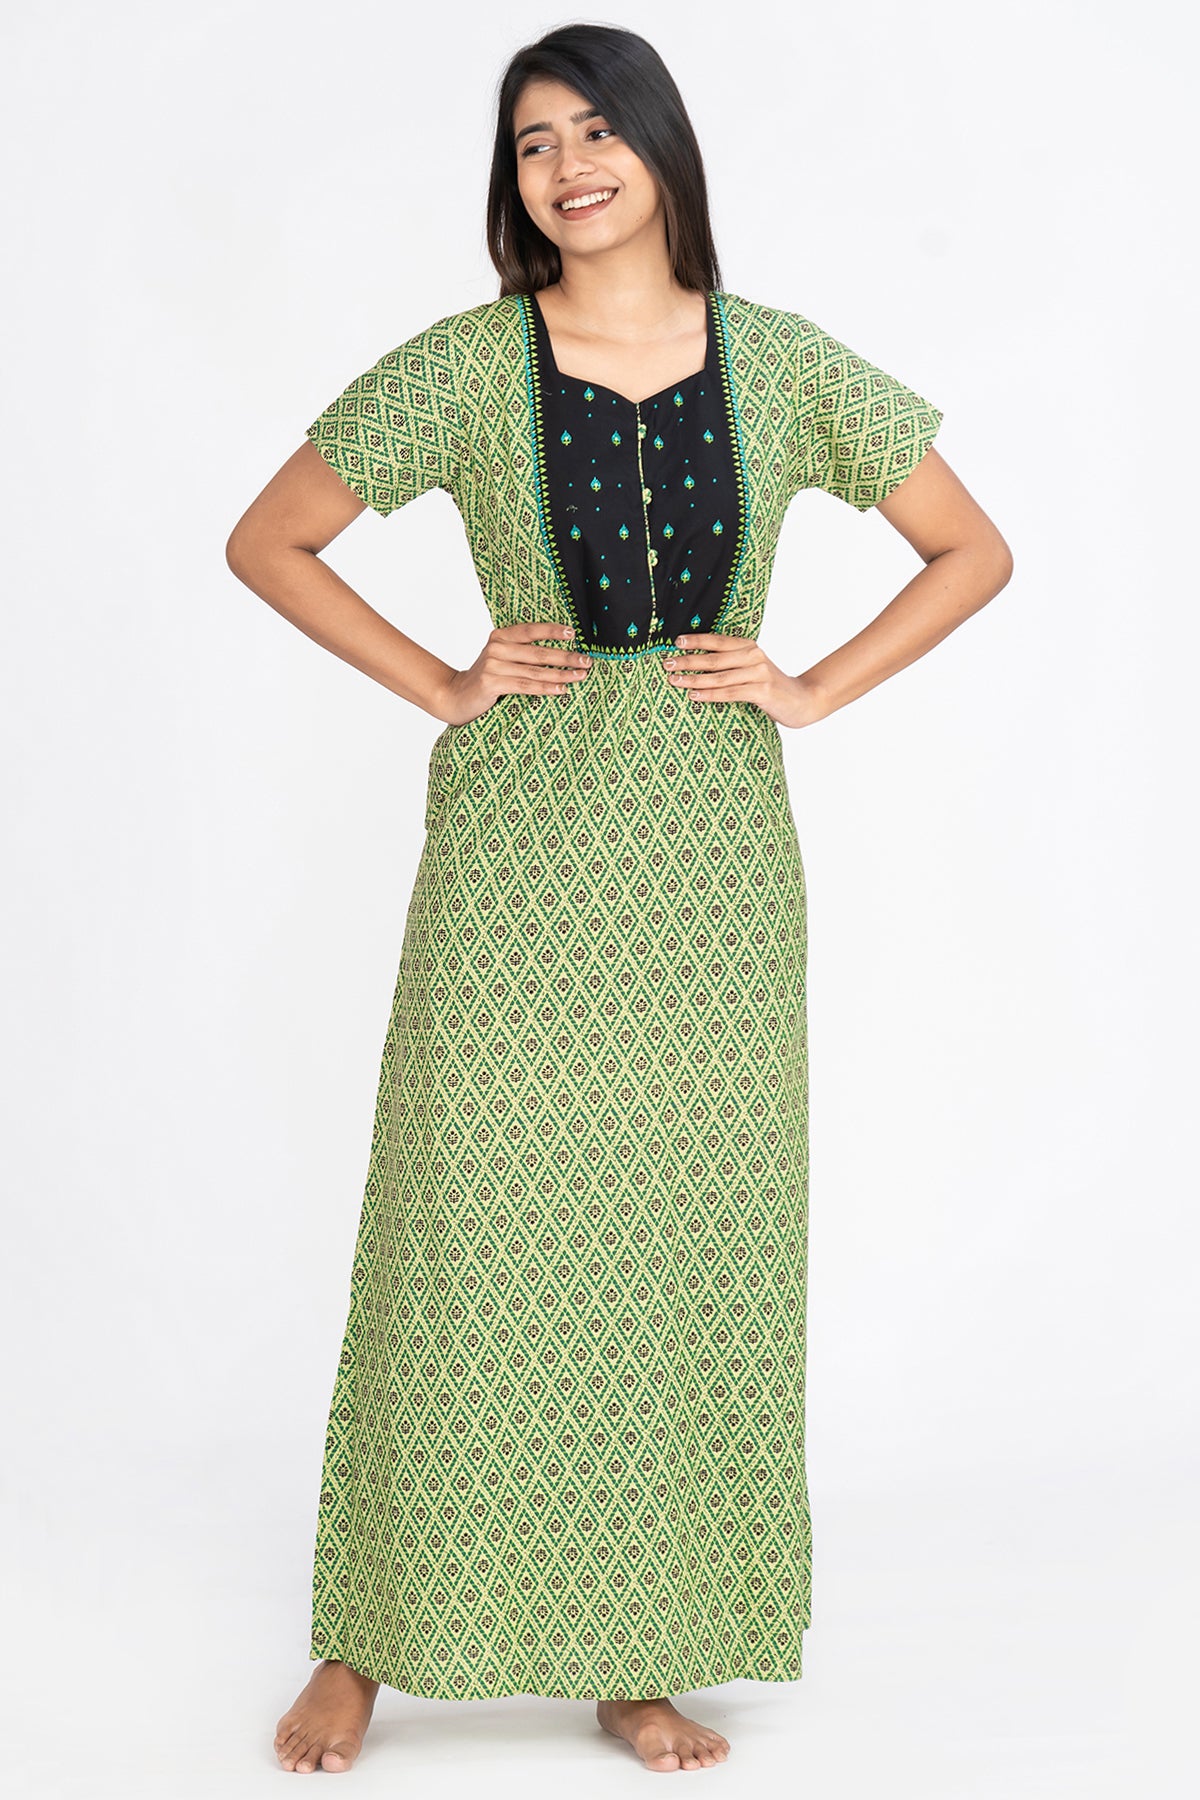 All Over Geometric Motif Print With Contrast Embroidered Yoke Nighty - Green